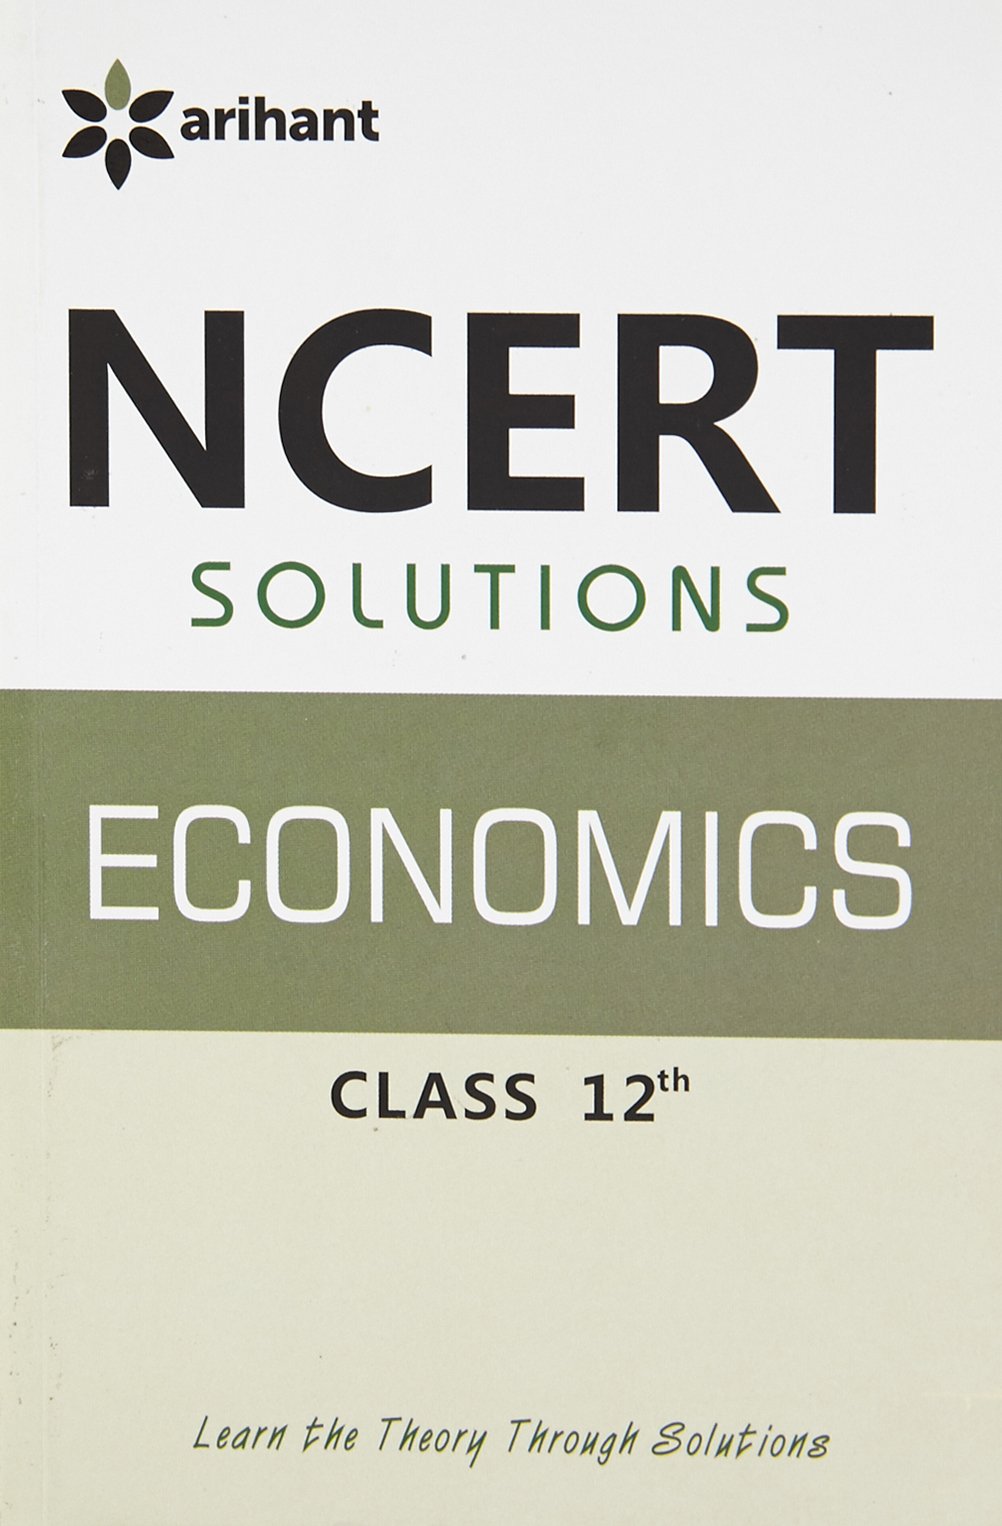 NCERT Solutions - Economics for Class XII